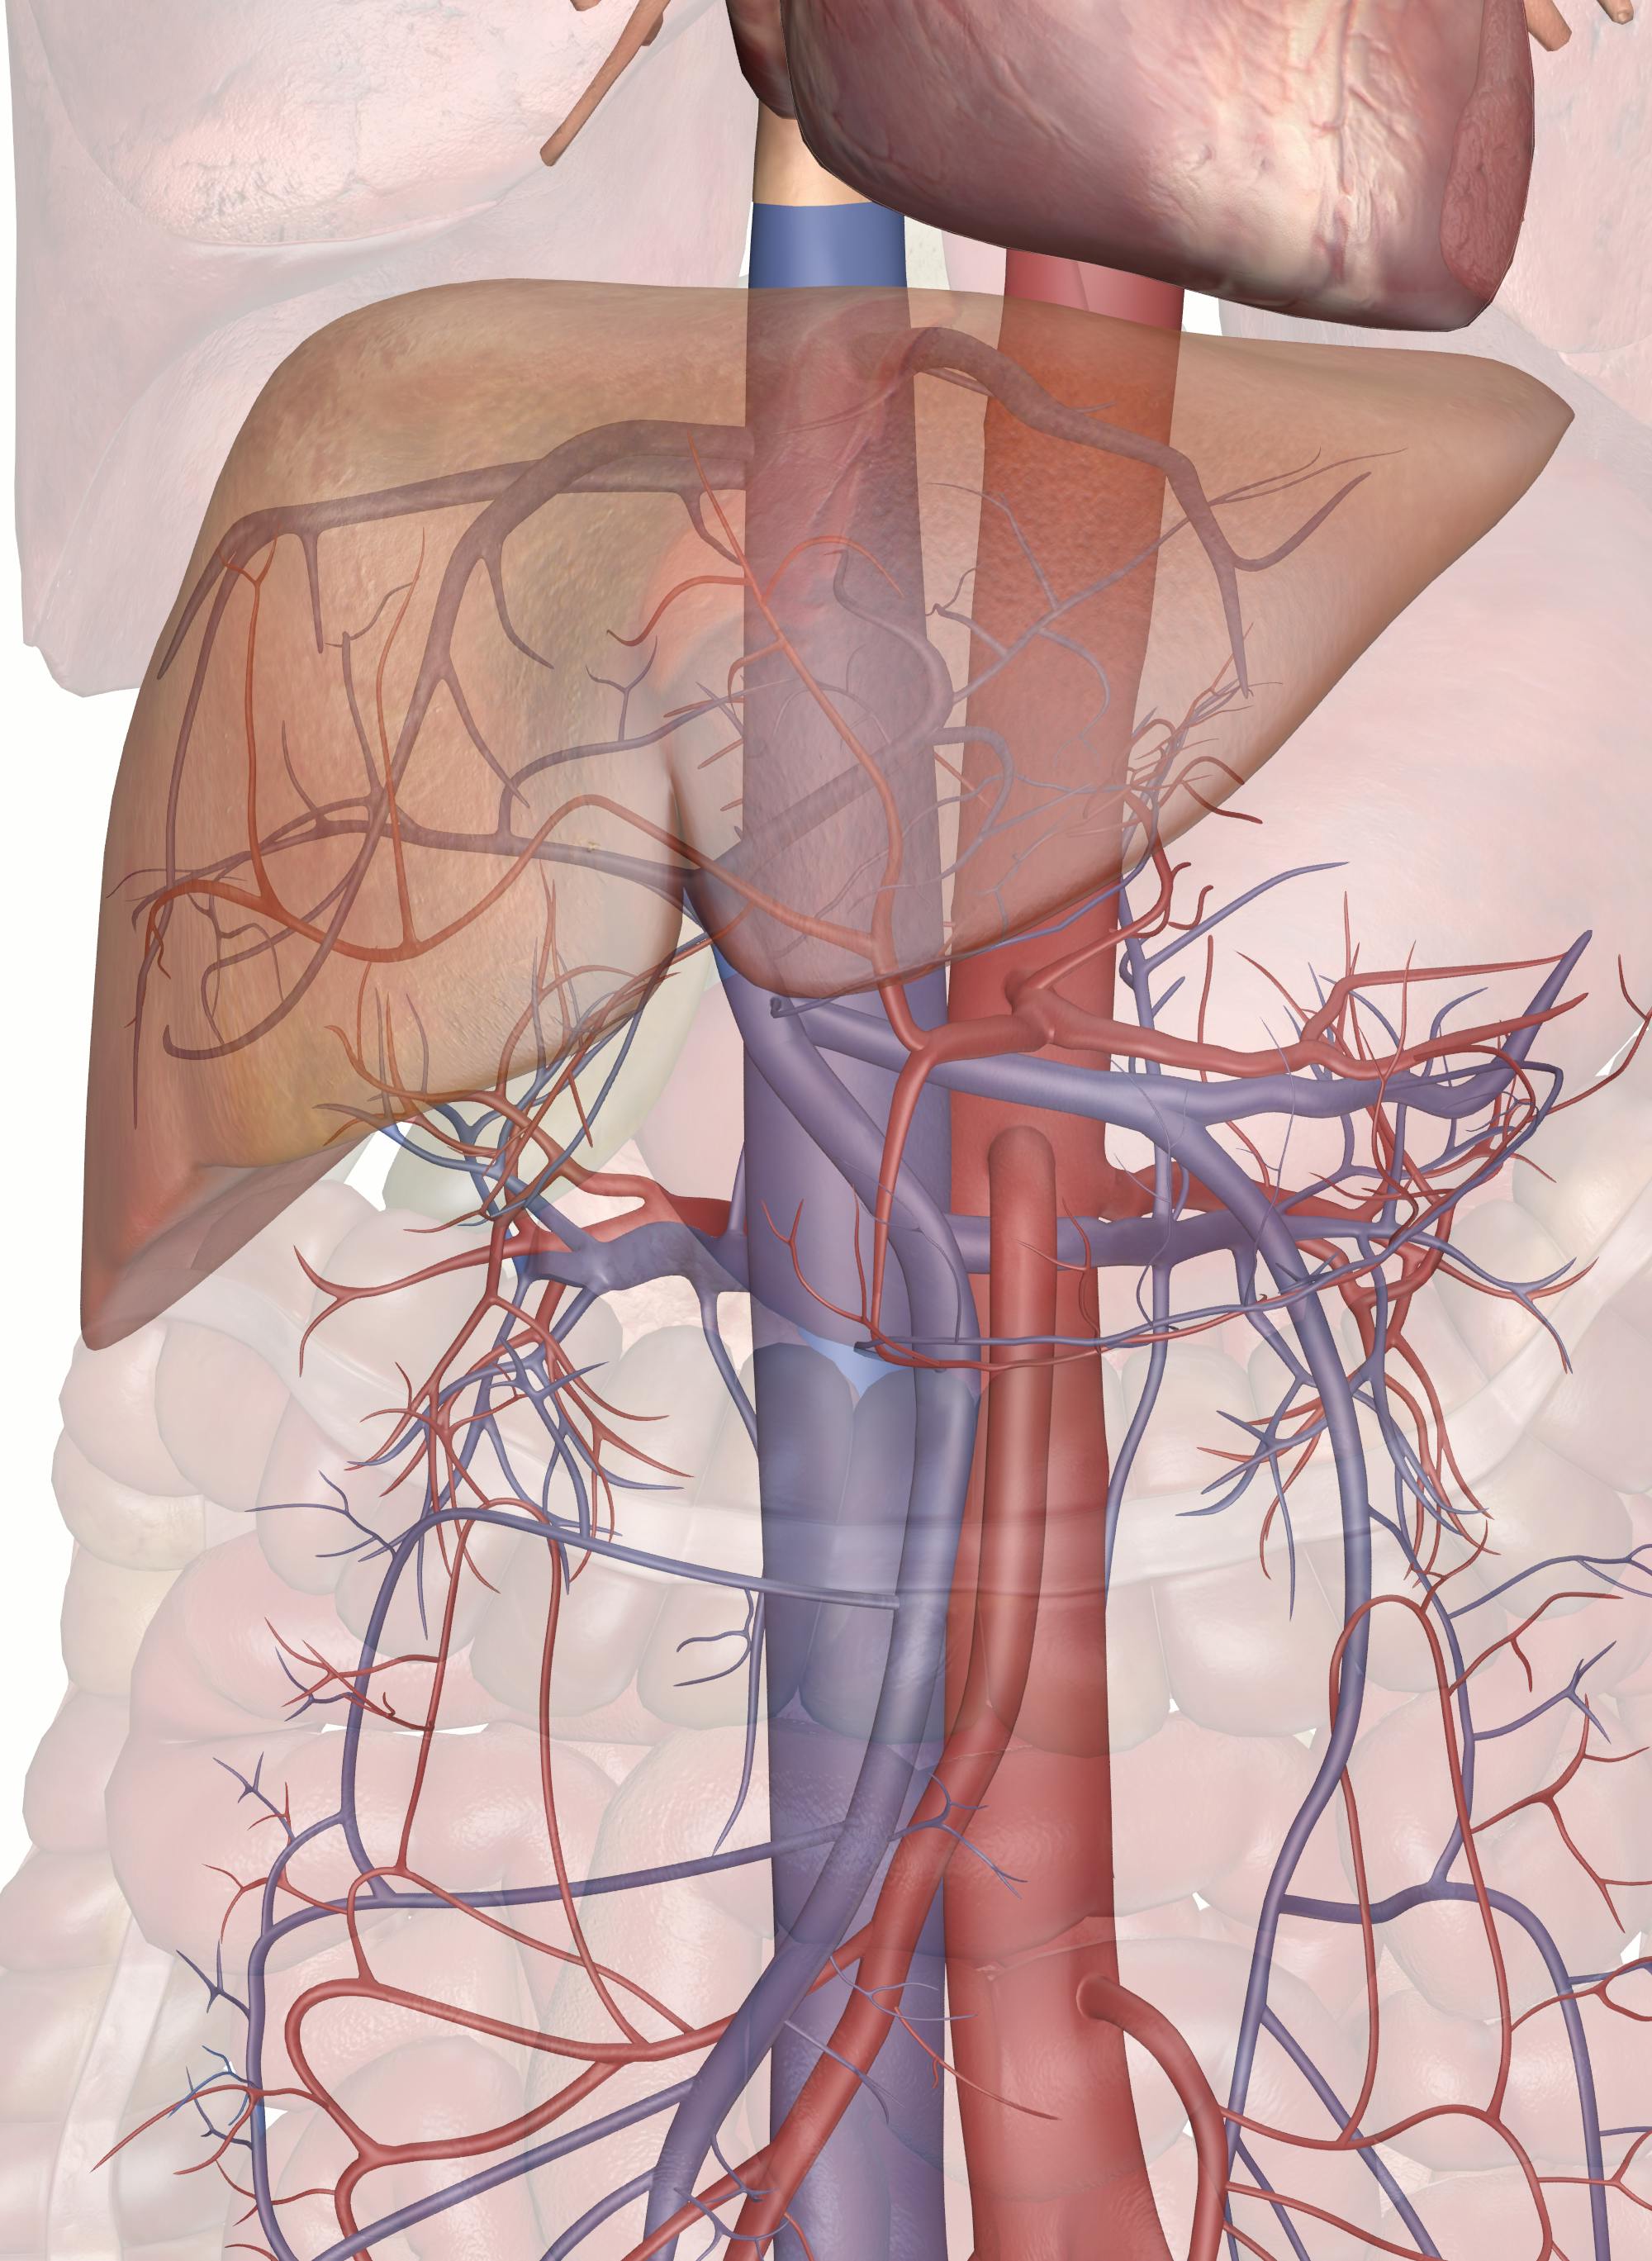 the-circulatory-routes-of-the-liver-3d-anatomy-model